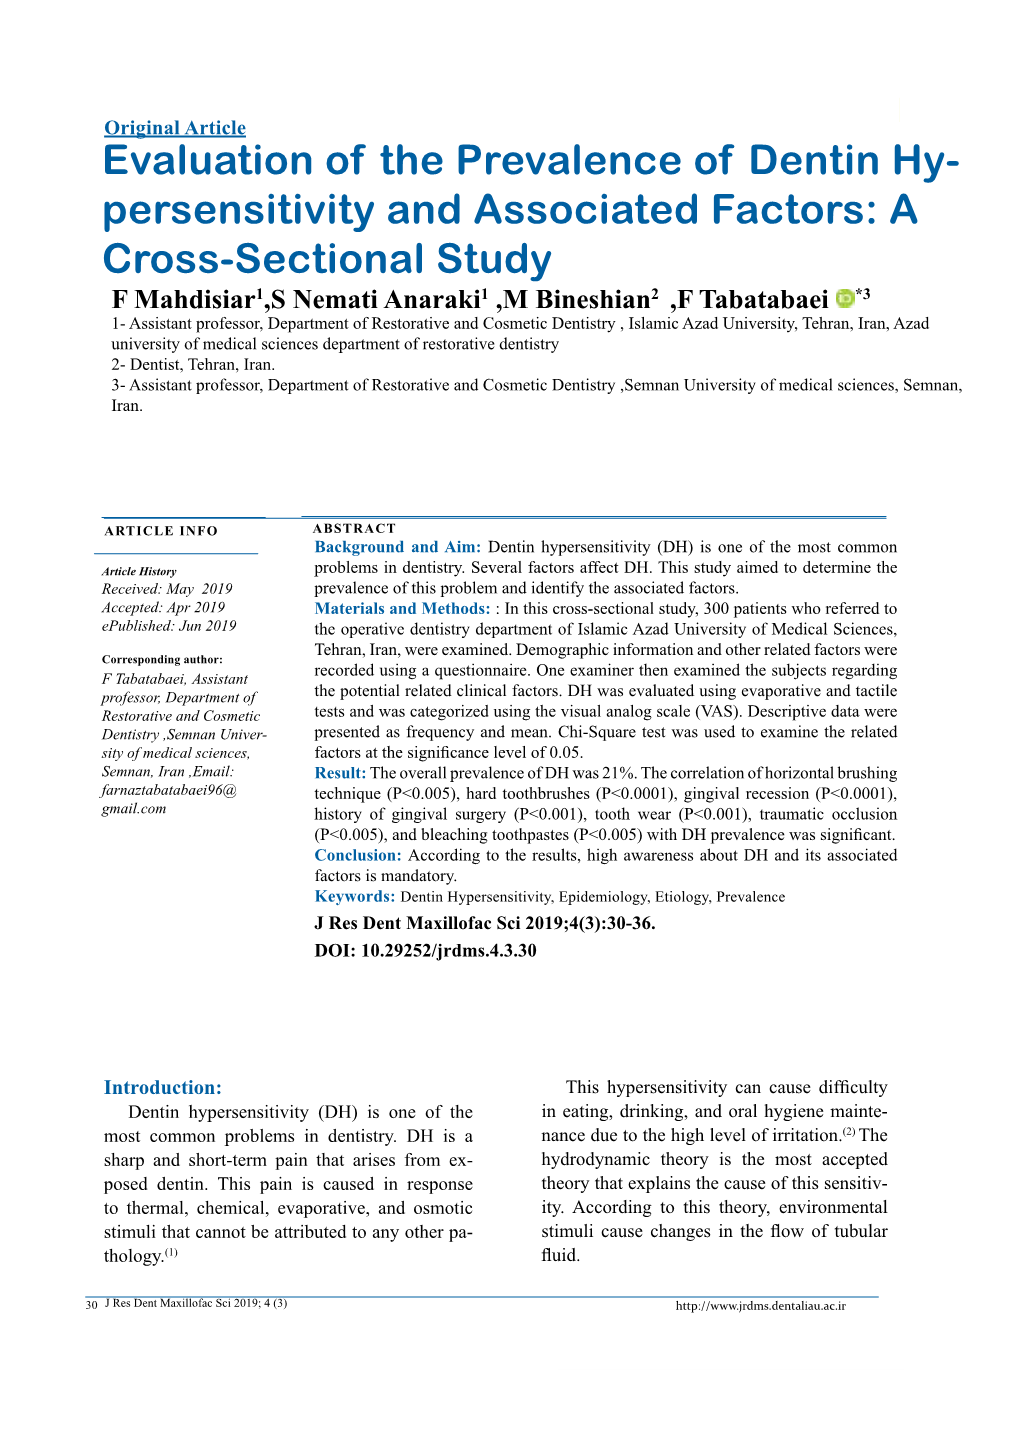 A Cross-Sectional Study